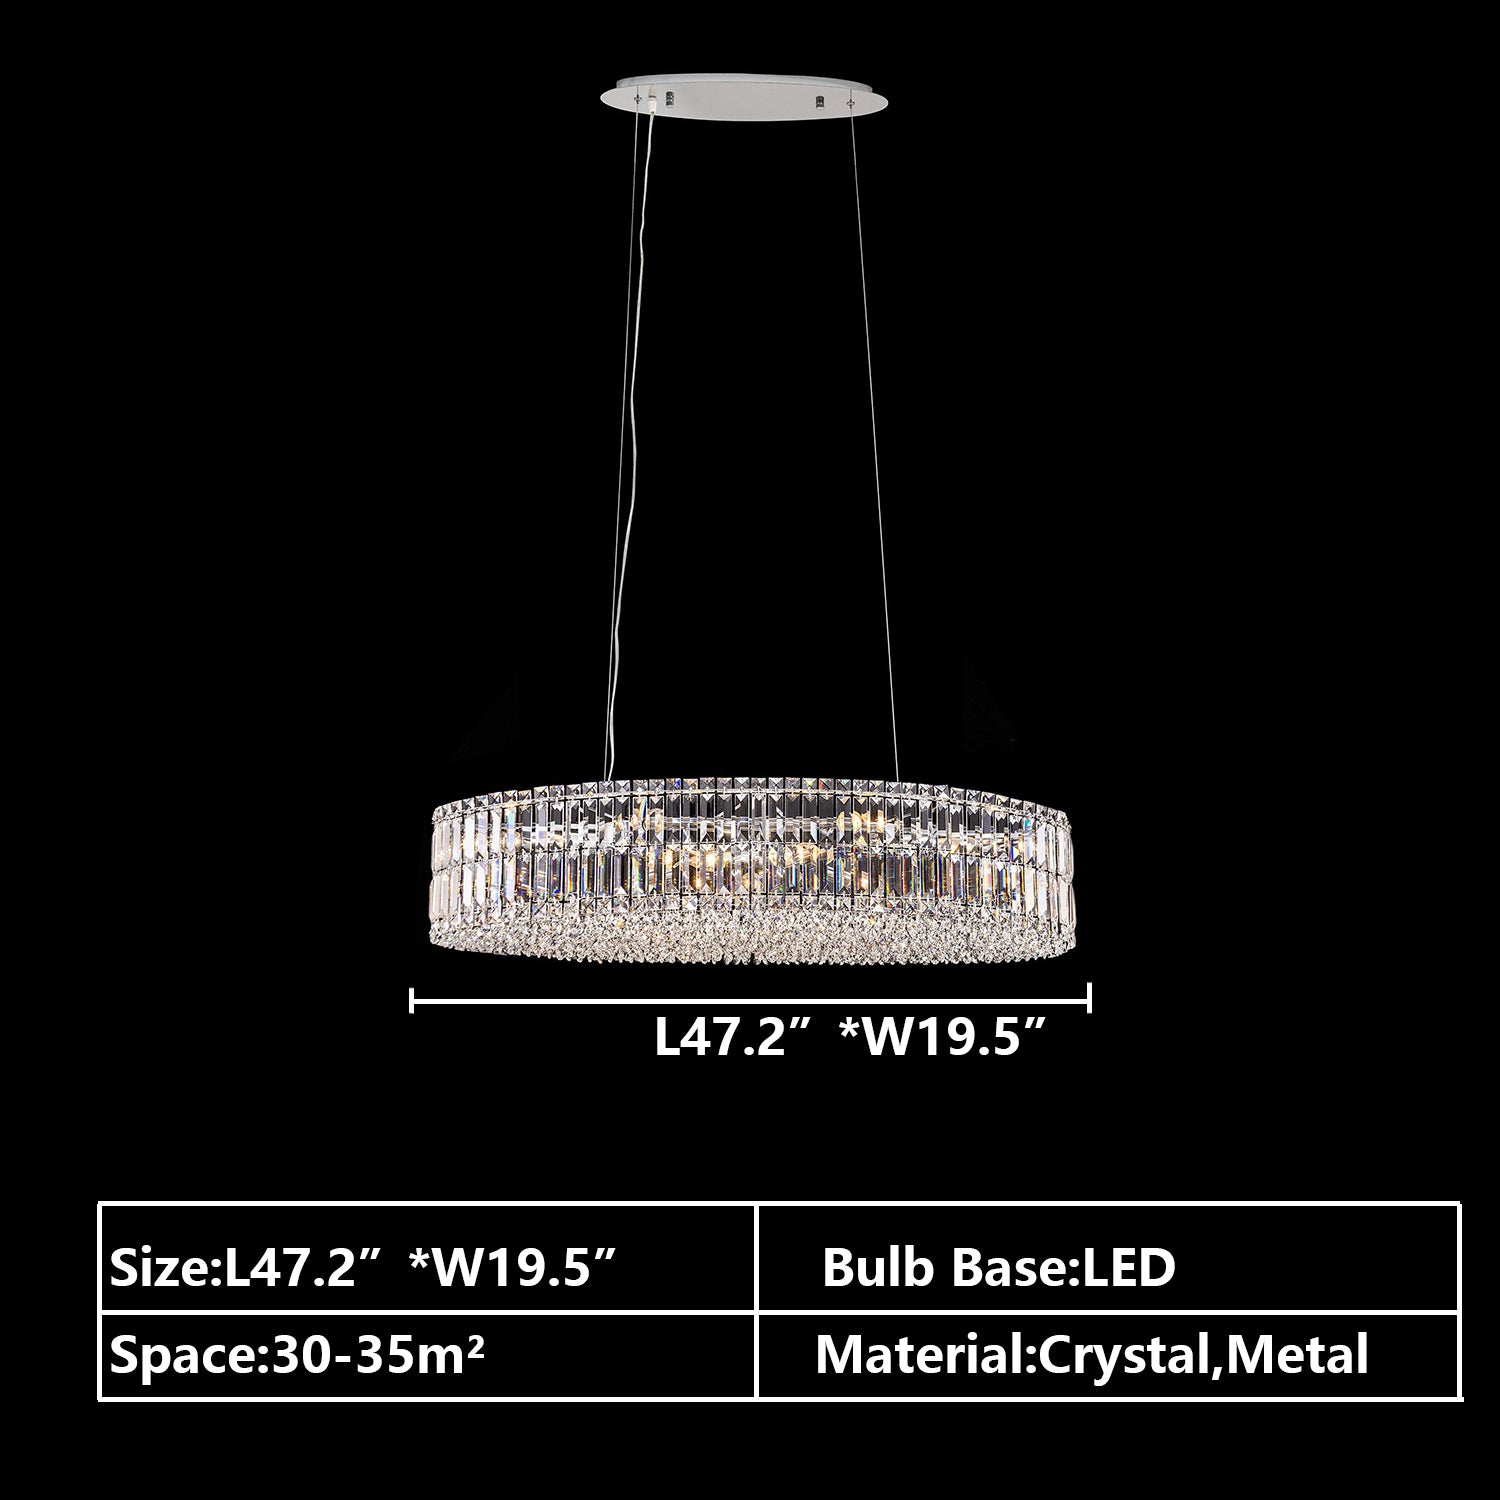 Oval:L47.2"*W19.5" chandelier,chandeliers,pendant,round,oval,ceiling,crystal,metal,chrome,silver,clear crystal,adjustable,chain,light luxury,luxury,living room,dining room,foyer,entrys,hallway,bathroom,bedroom,home office